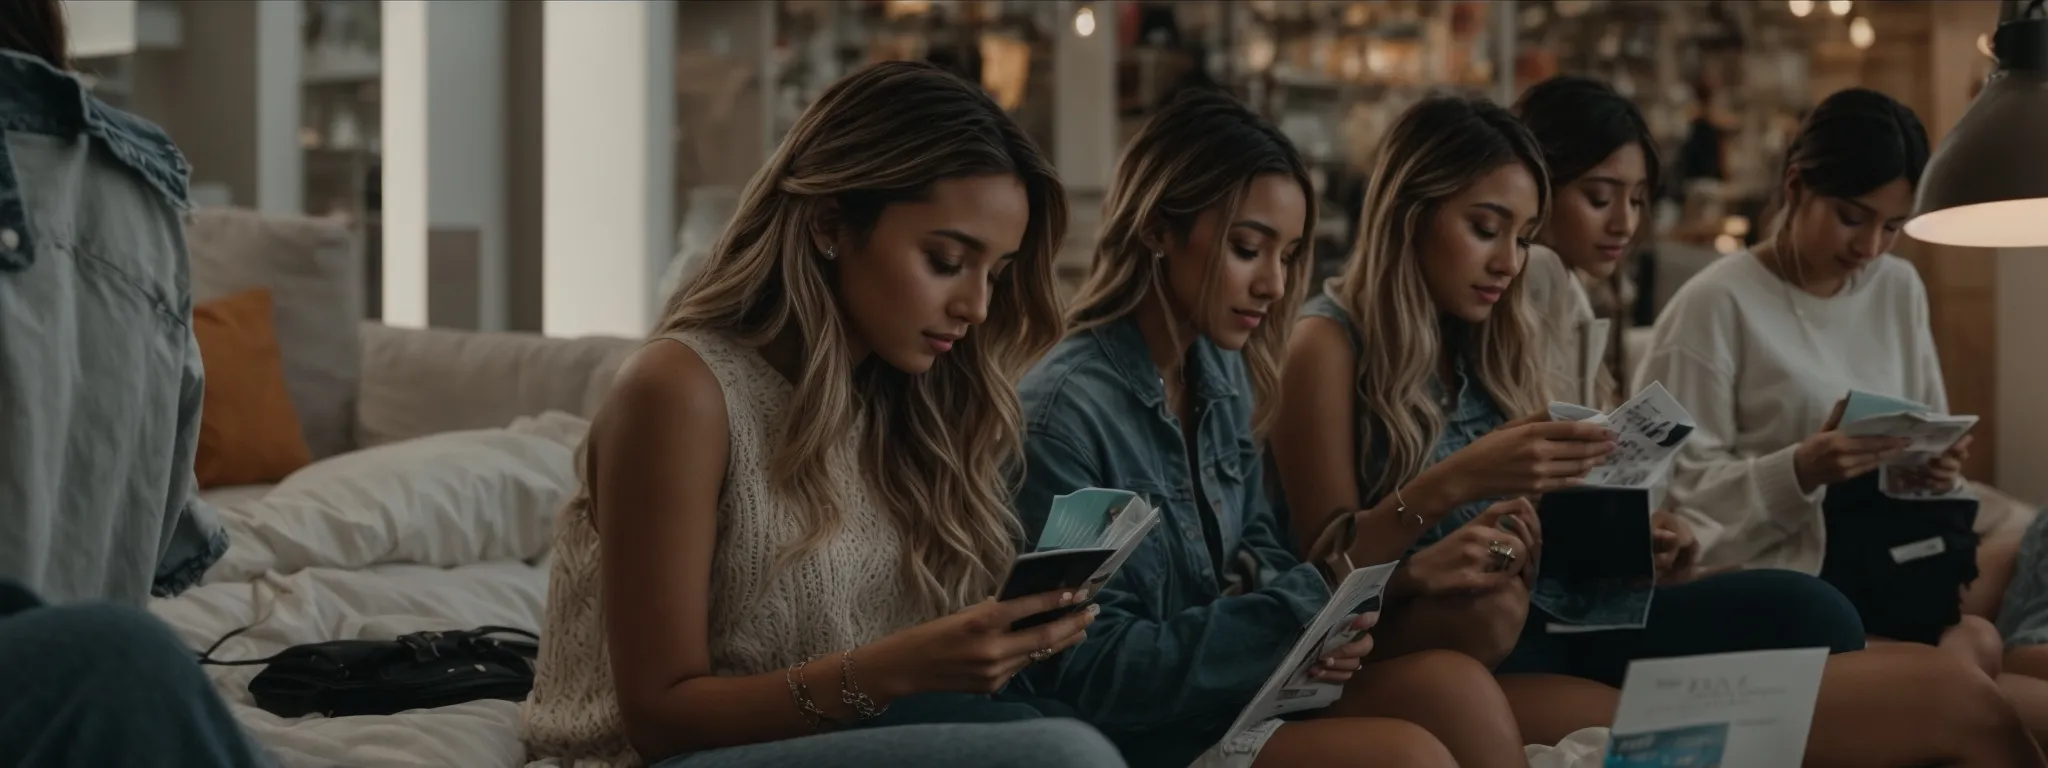 an apparel brand photo shoot featuring social media influencers casually flipping through a magazine, surrounded by smartphones and cameras displaying the same content.